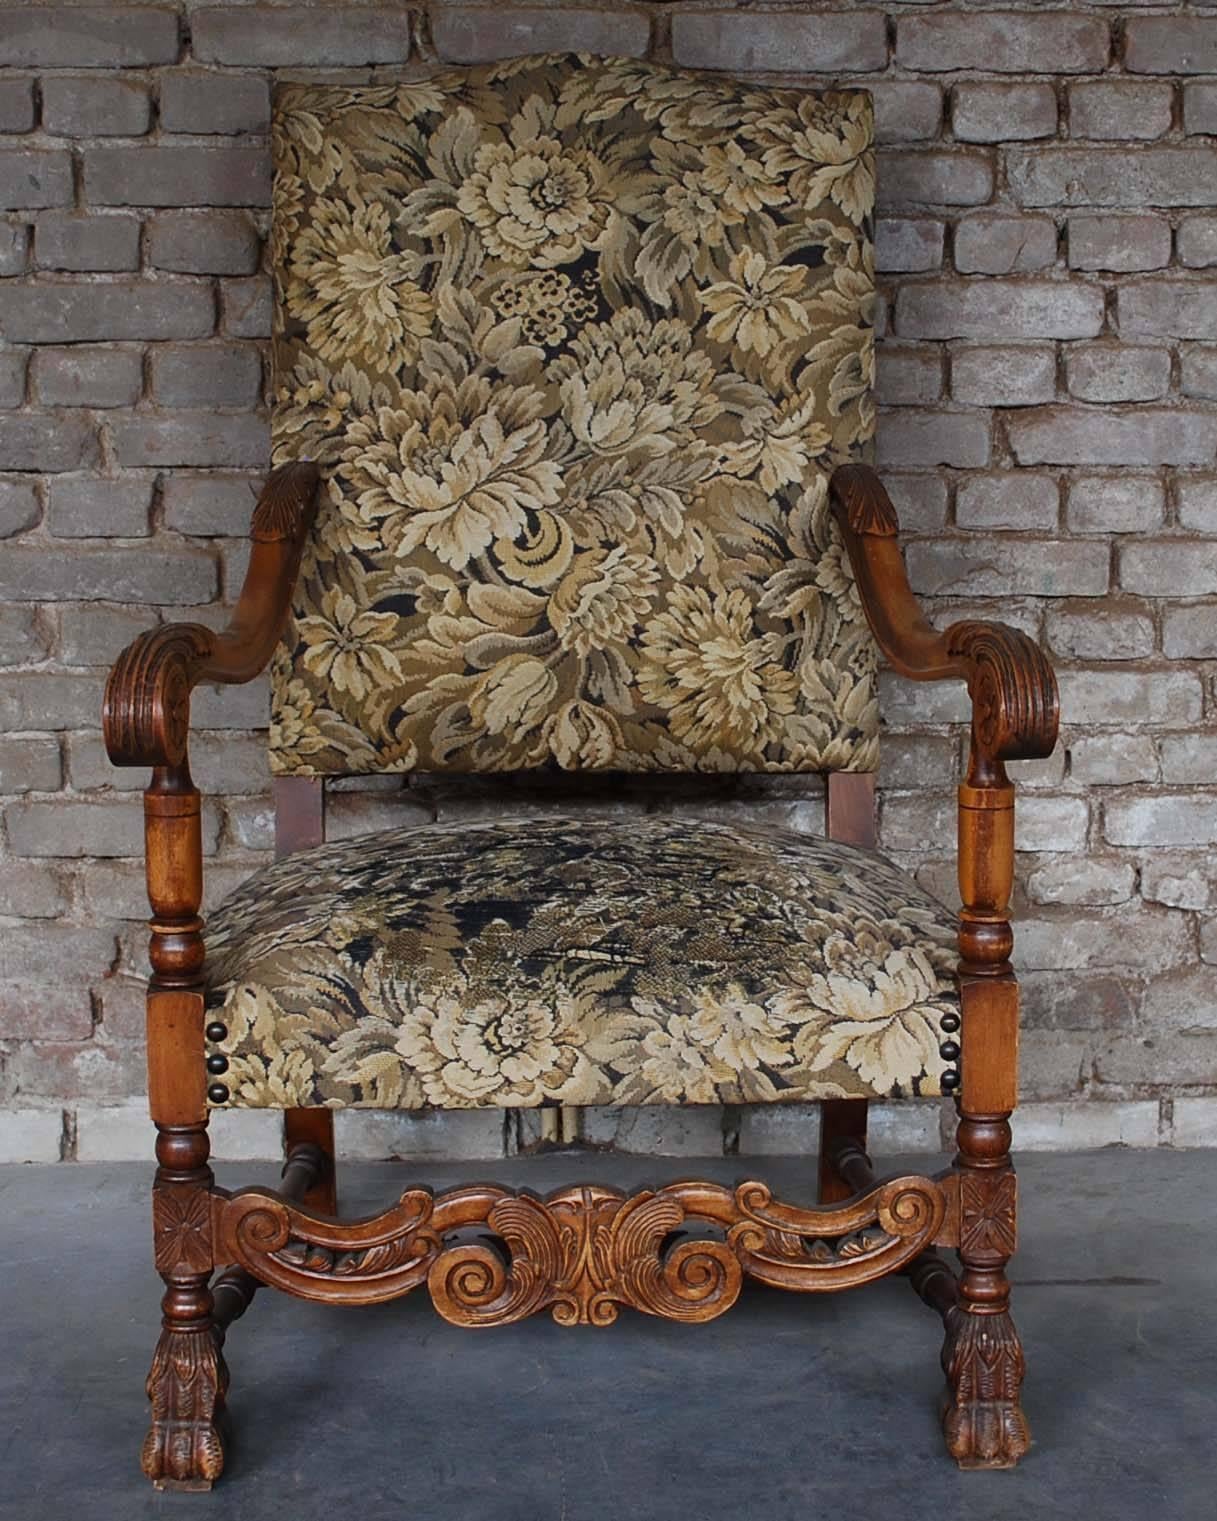 This late 19th century tall back French throne chair is made in solid beechwood. It has the original upholstery that has some wear on the seating surface. The armrests have acanthus leave carvings.
It has spooled legs that end in claw feet and a